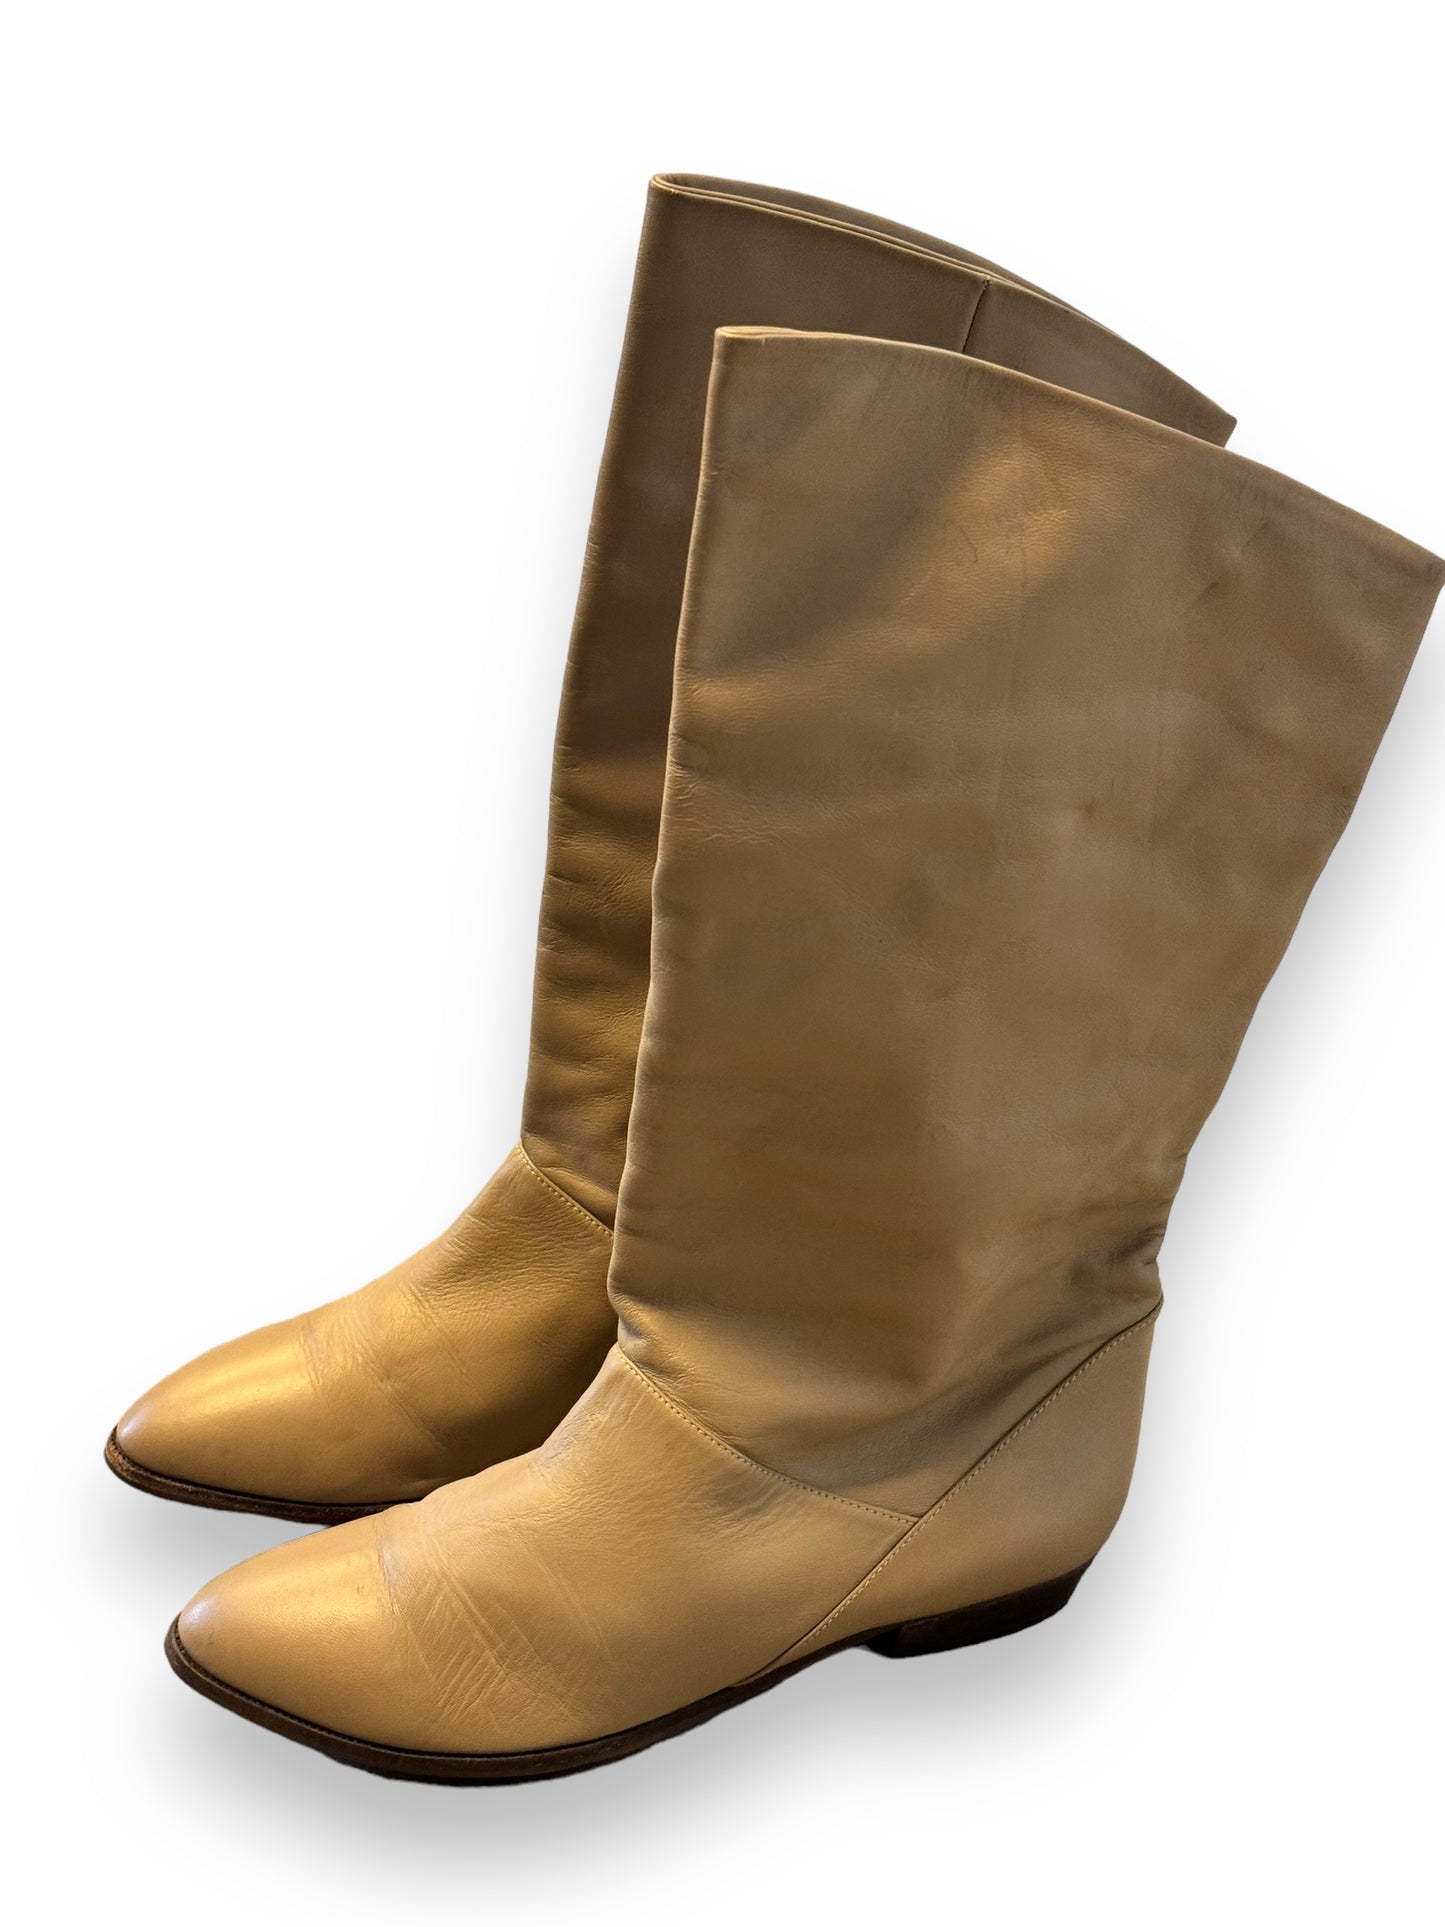 1980s Flat Beige Leather Boots